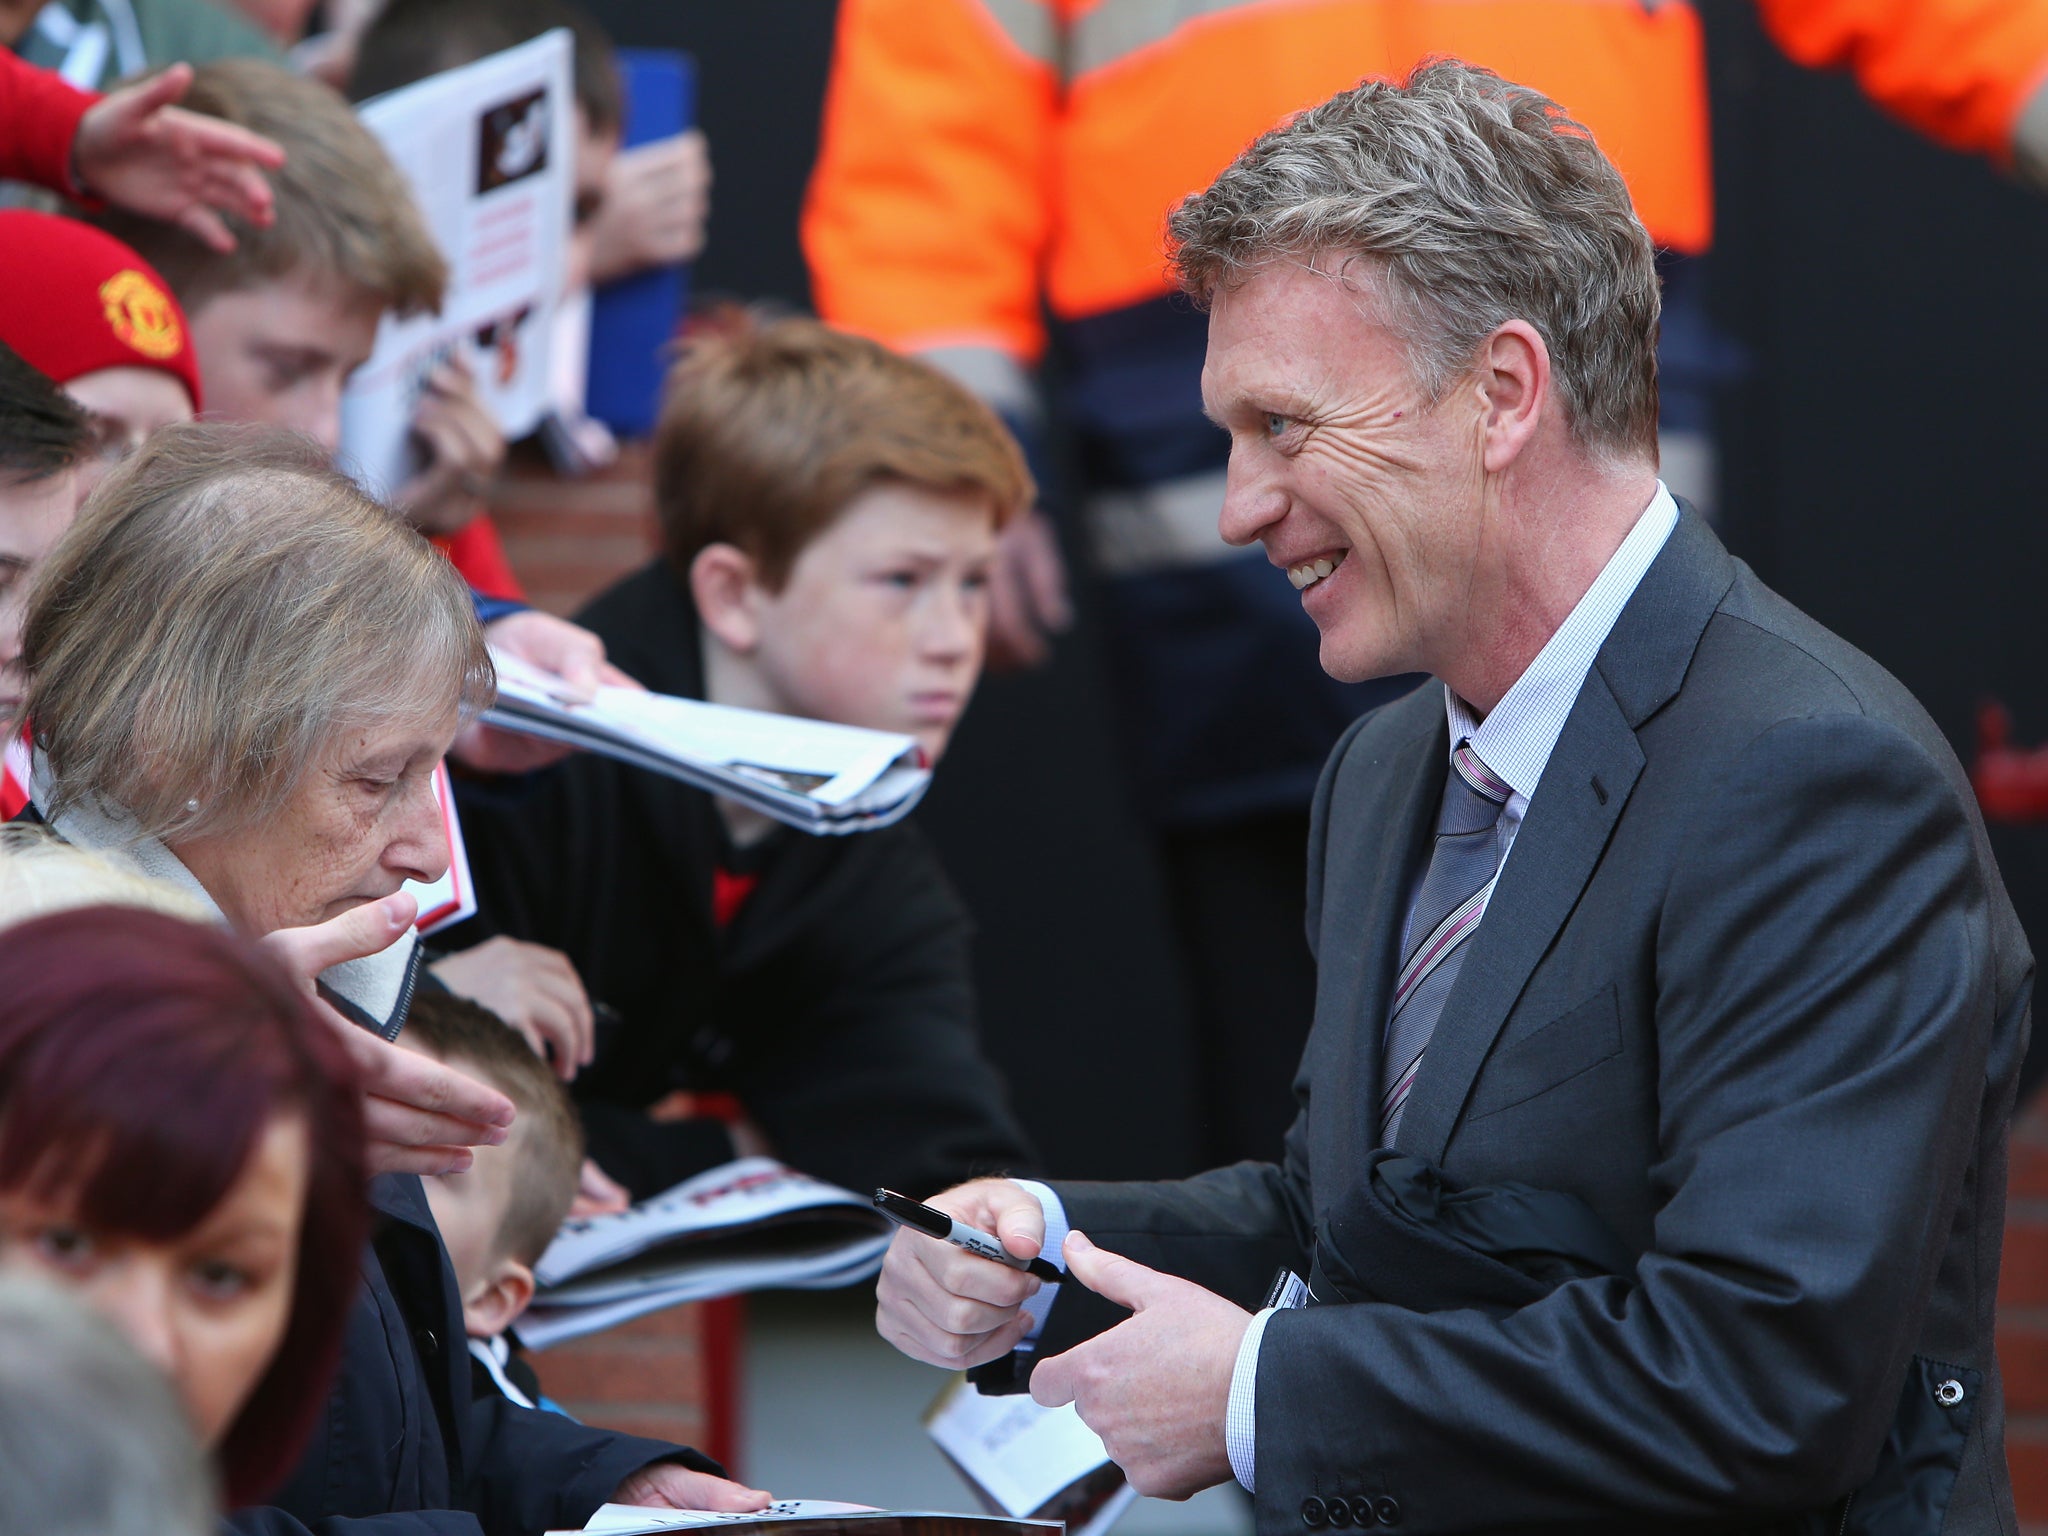 David Moyes grins as he signs autographs for the Manchester United fans